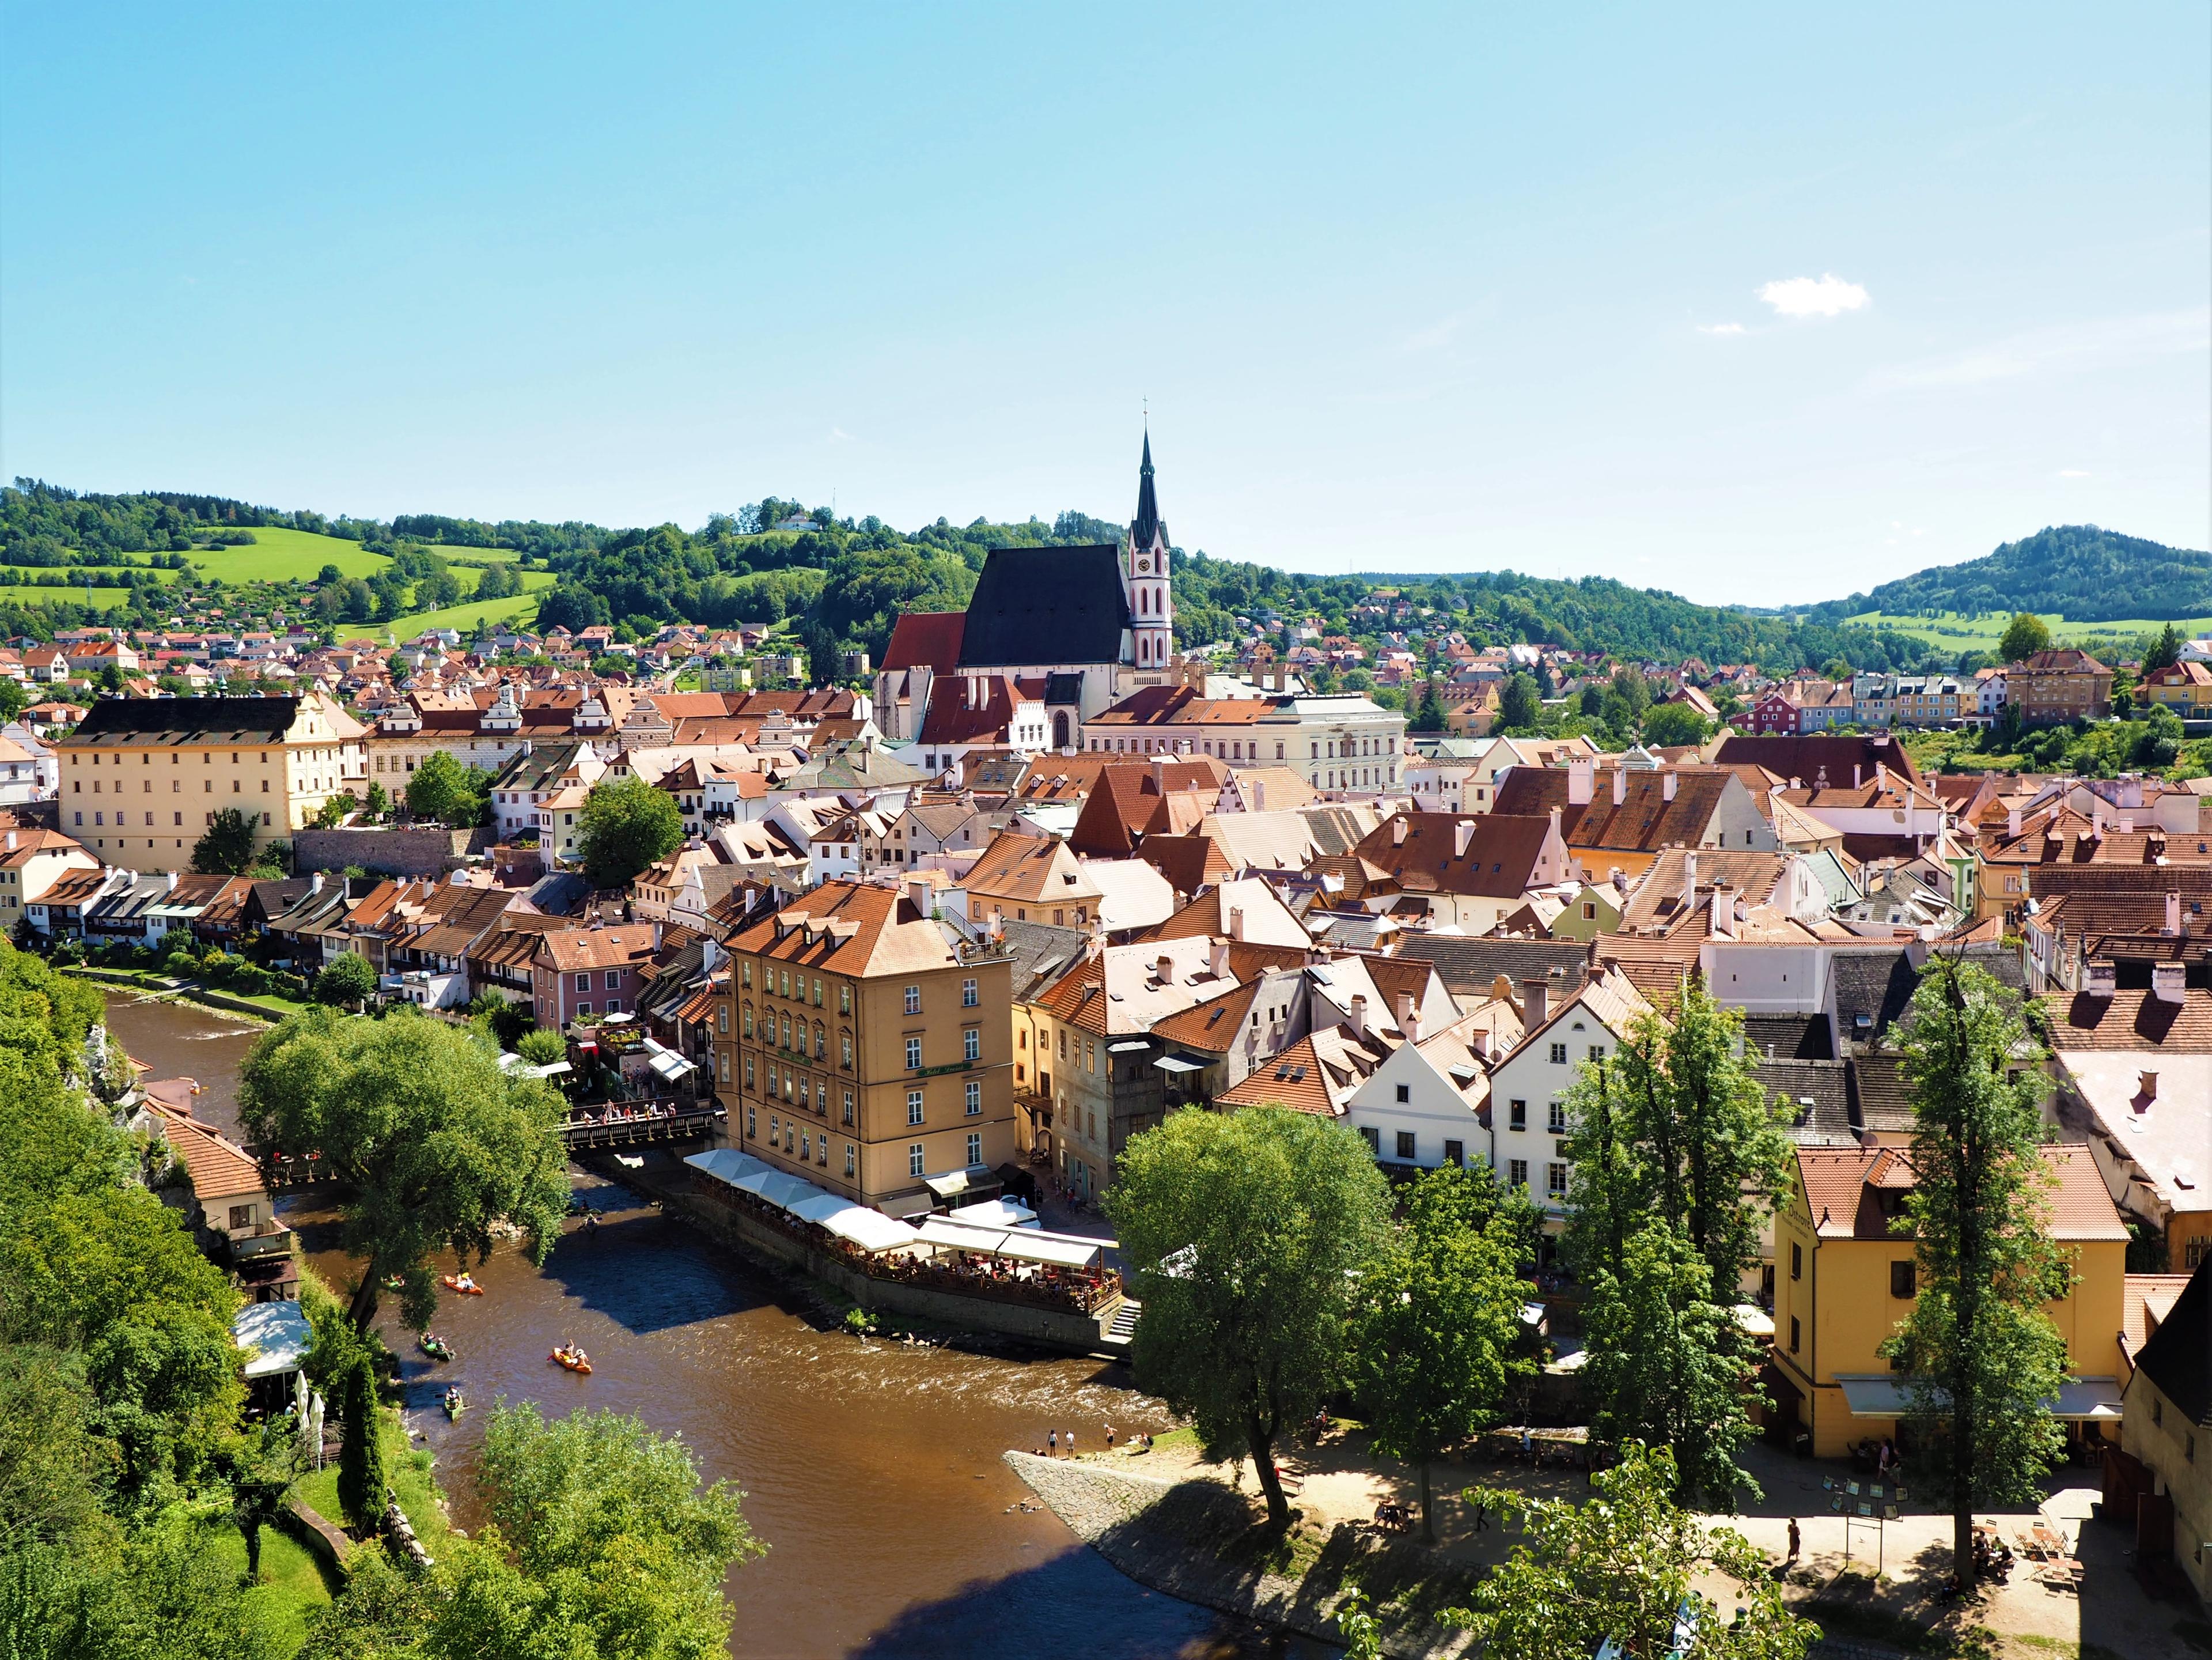 Why You’ll Love the Czech Republic